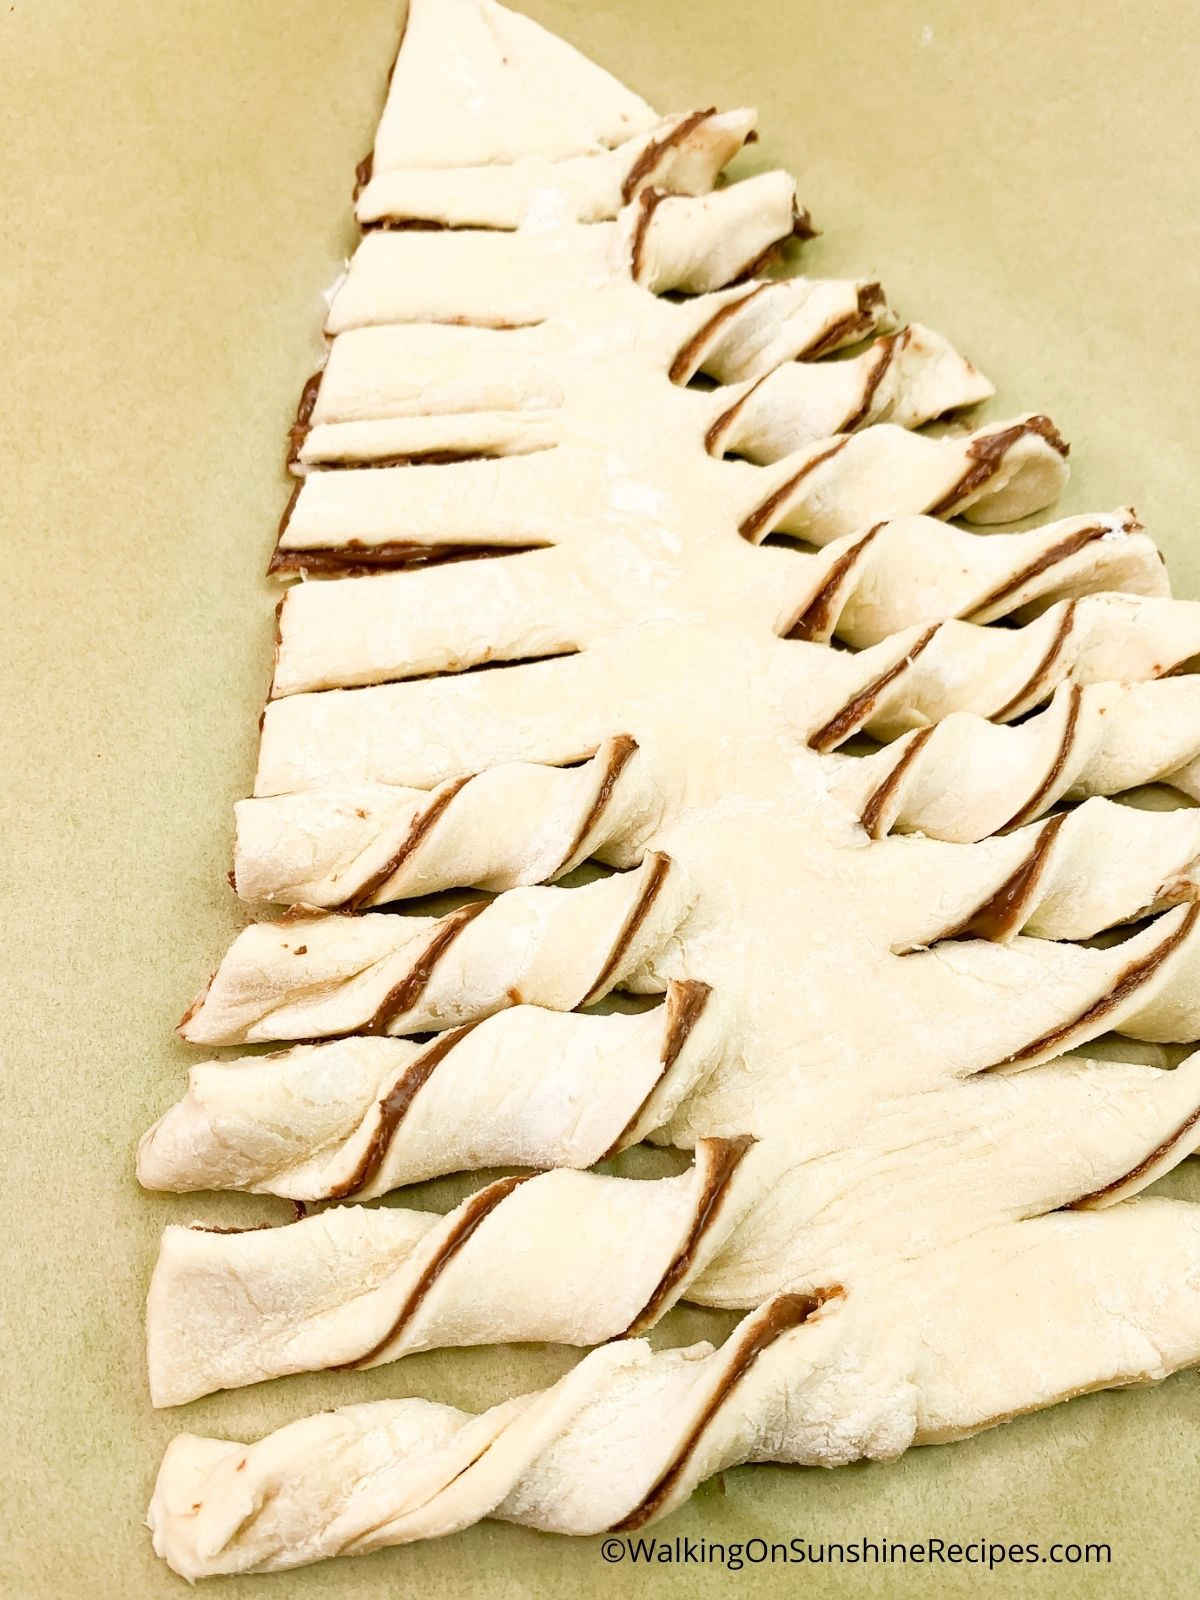 Twist Nutella puff pastry xmas tree branches.